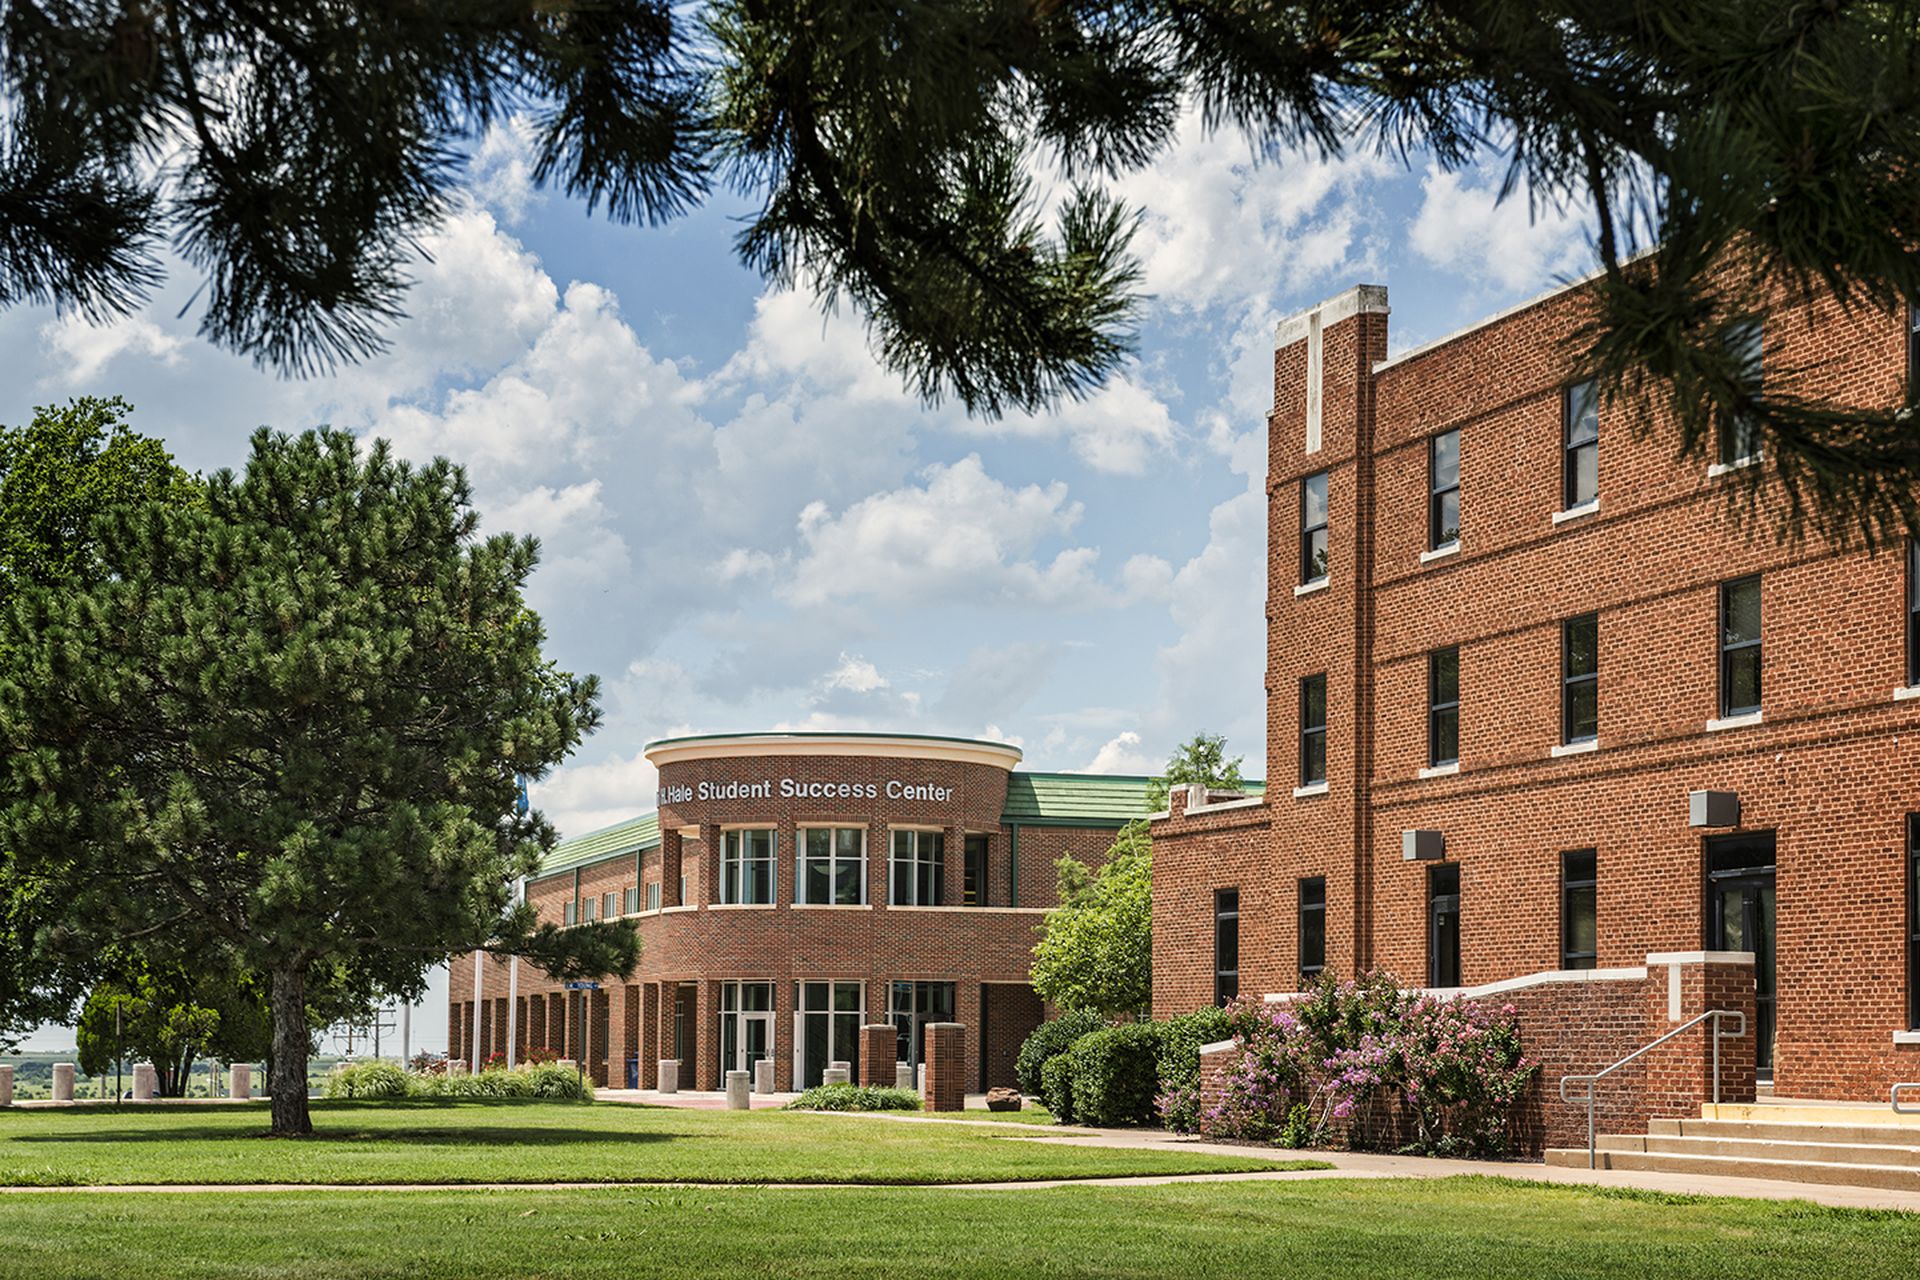 A shot of Langston University&#8217;s campus in Oklahoma. The school is one of 10 Historically Black Colleges and Universities that will partner with CYBER.ORG to identify and develop K-12 students for degrees and careers in cybersecurity. (Image credit: Langston University)